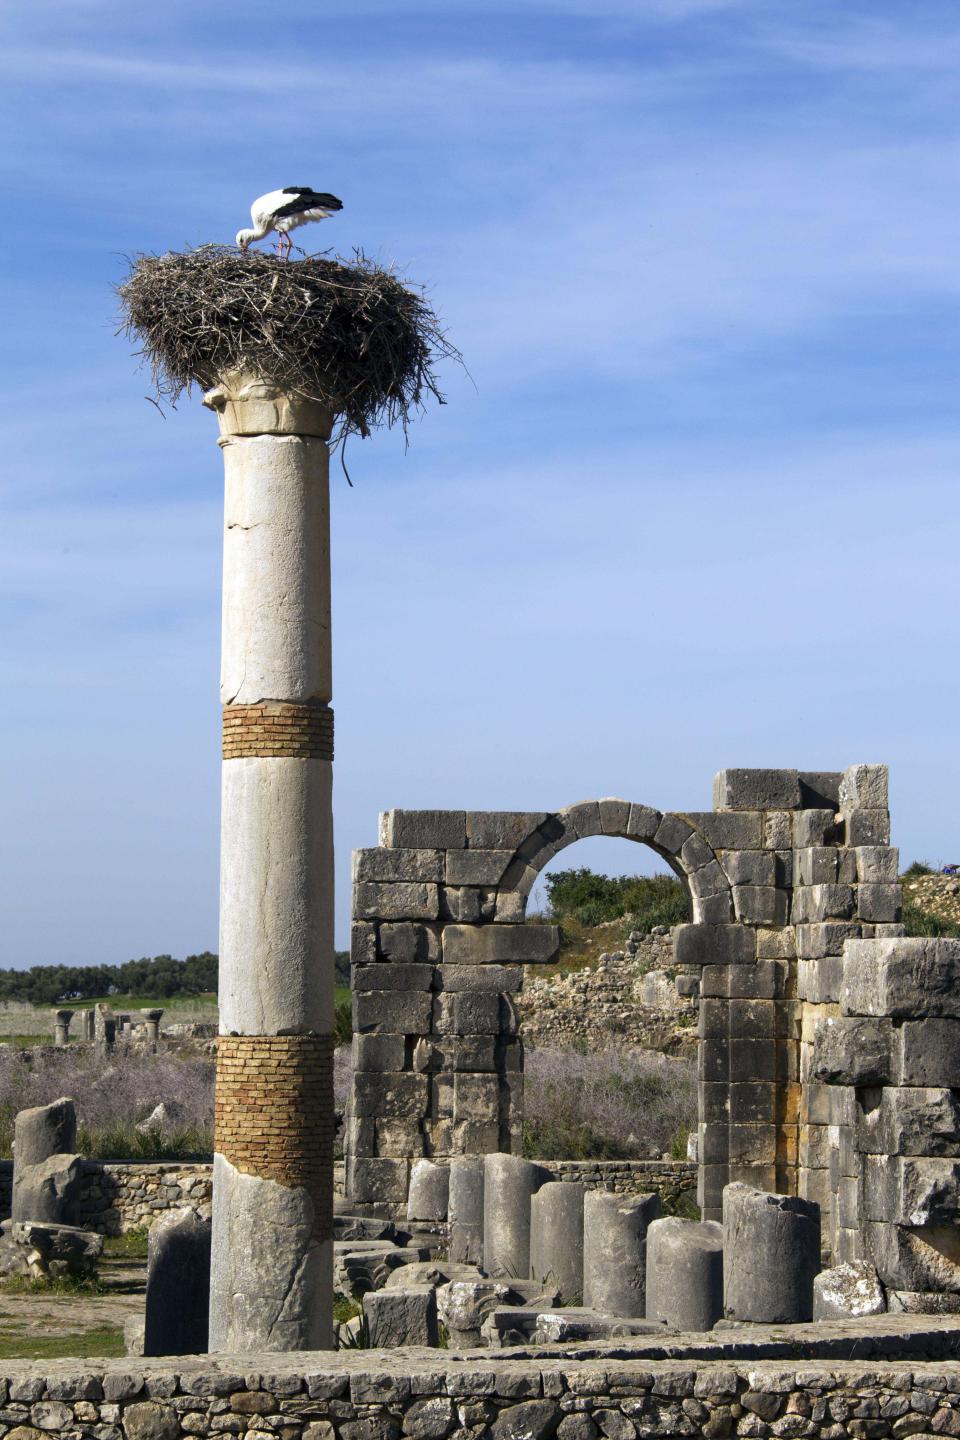 In this Thursday, March 8, 2012 photo, a stork nests on top of a pillar at the Basilica, the main administrative building of Volubilis, Morocco's premier Roman ruin near Meknes, Morocco. (AP Photo/Abdeljalil Bounhar)